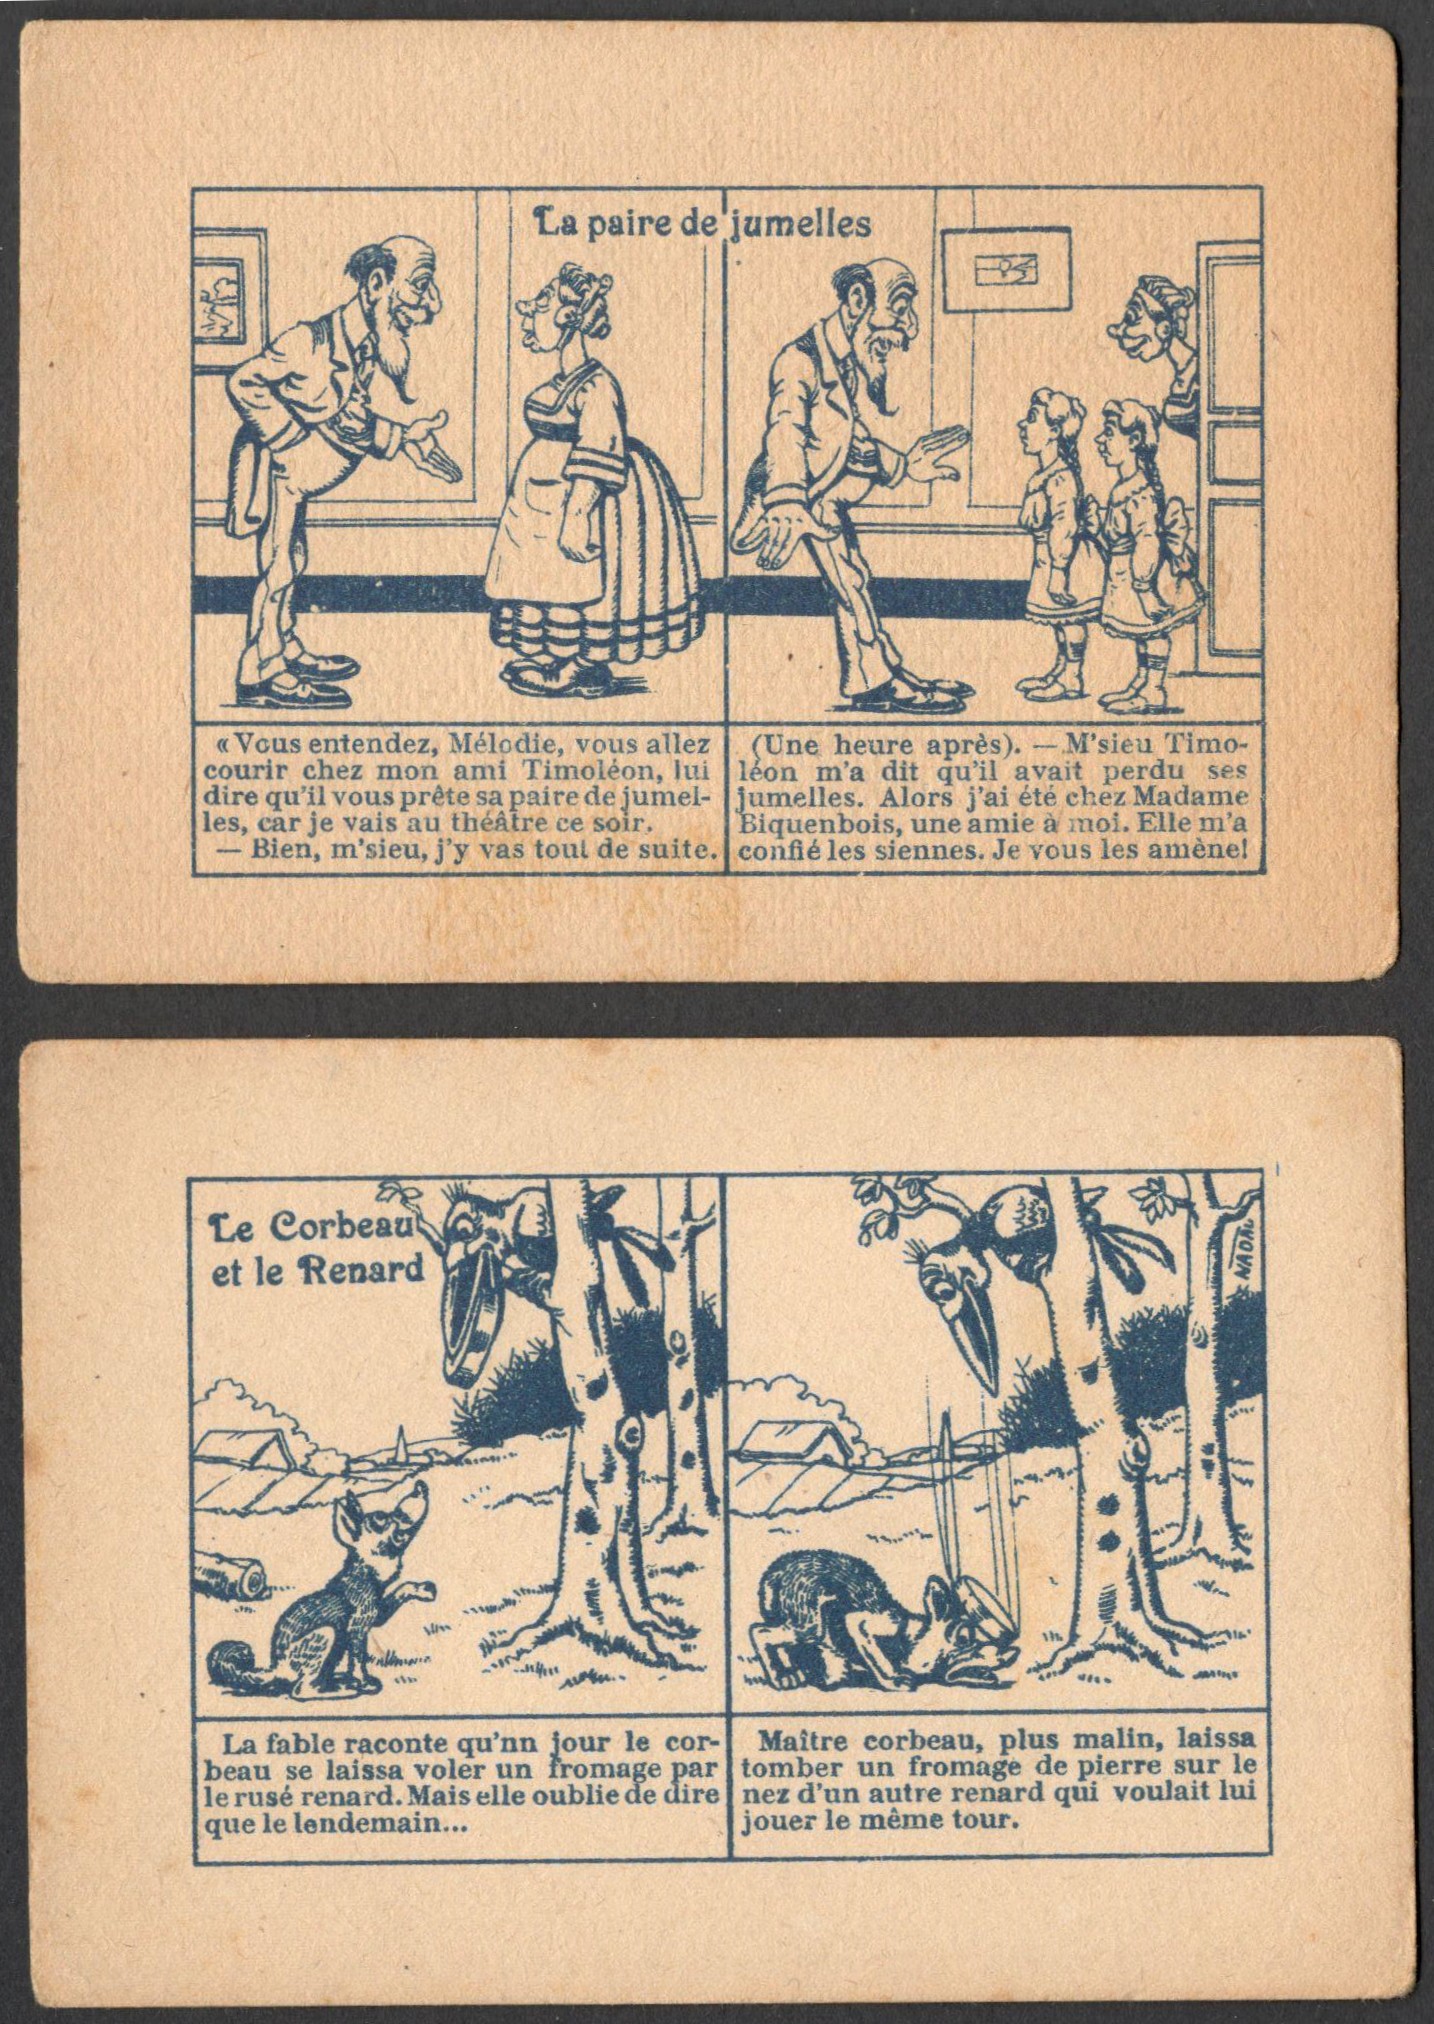 TEN EARLY FRENCH CARDS SHOWING CHILDREN'S STORIES LE CORBEAU ET LE RENARD (THE FOX AND THE CROW)